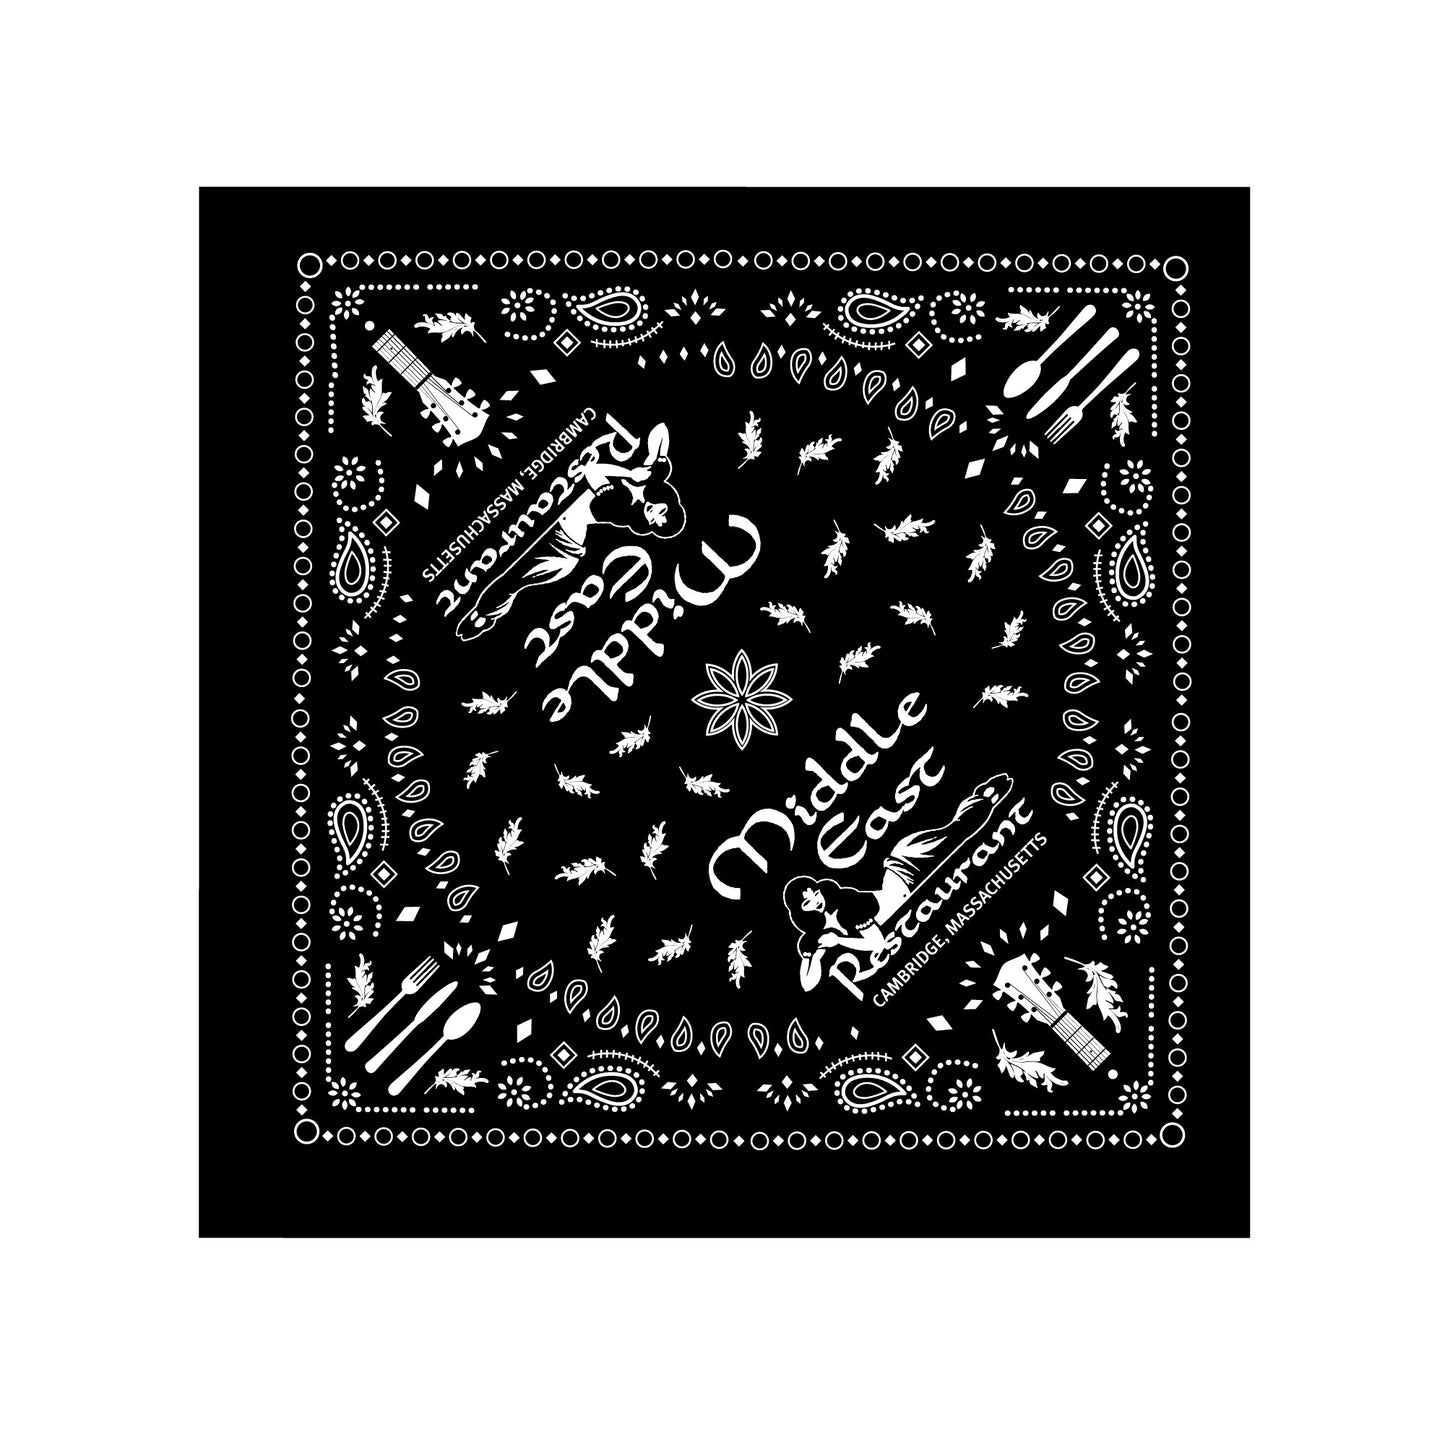 black cotton bandana screen printed with the logo of The Middle East restaurant and nightclub, Cambridge, MA